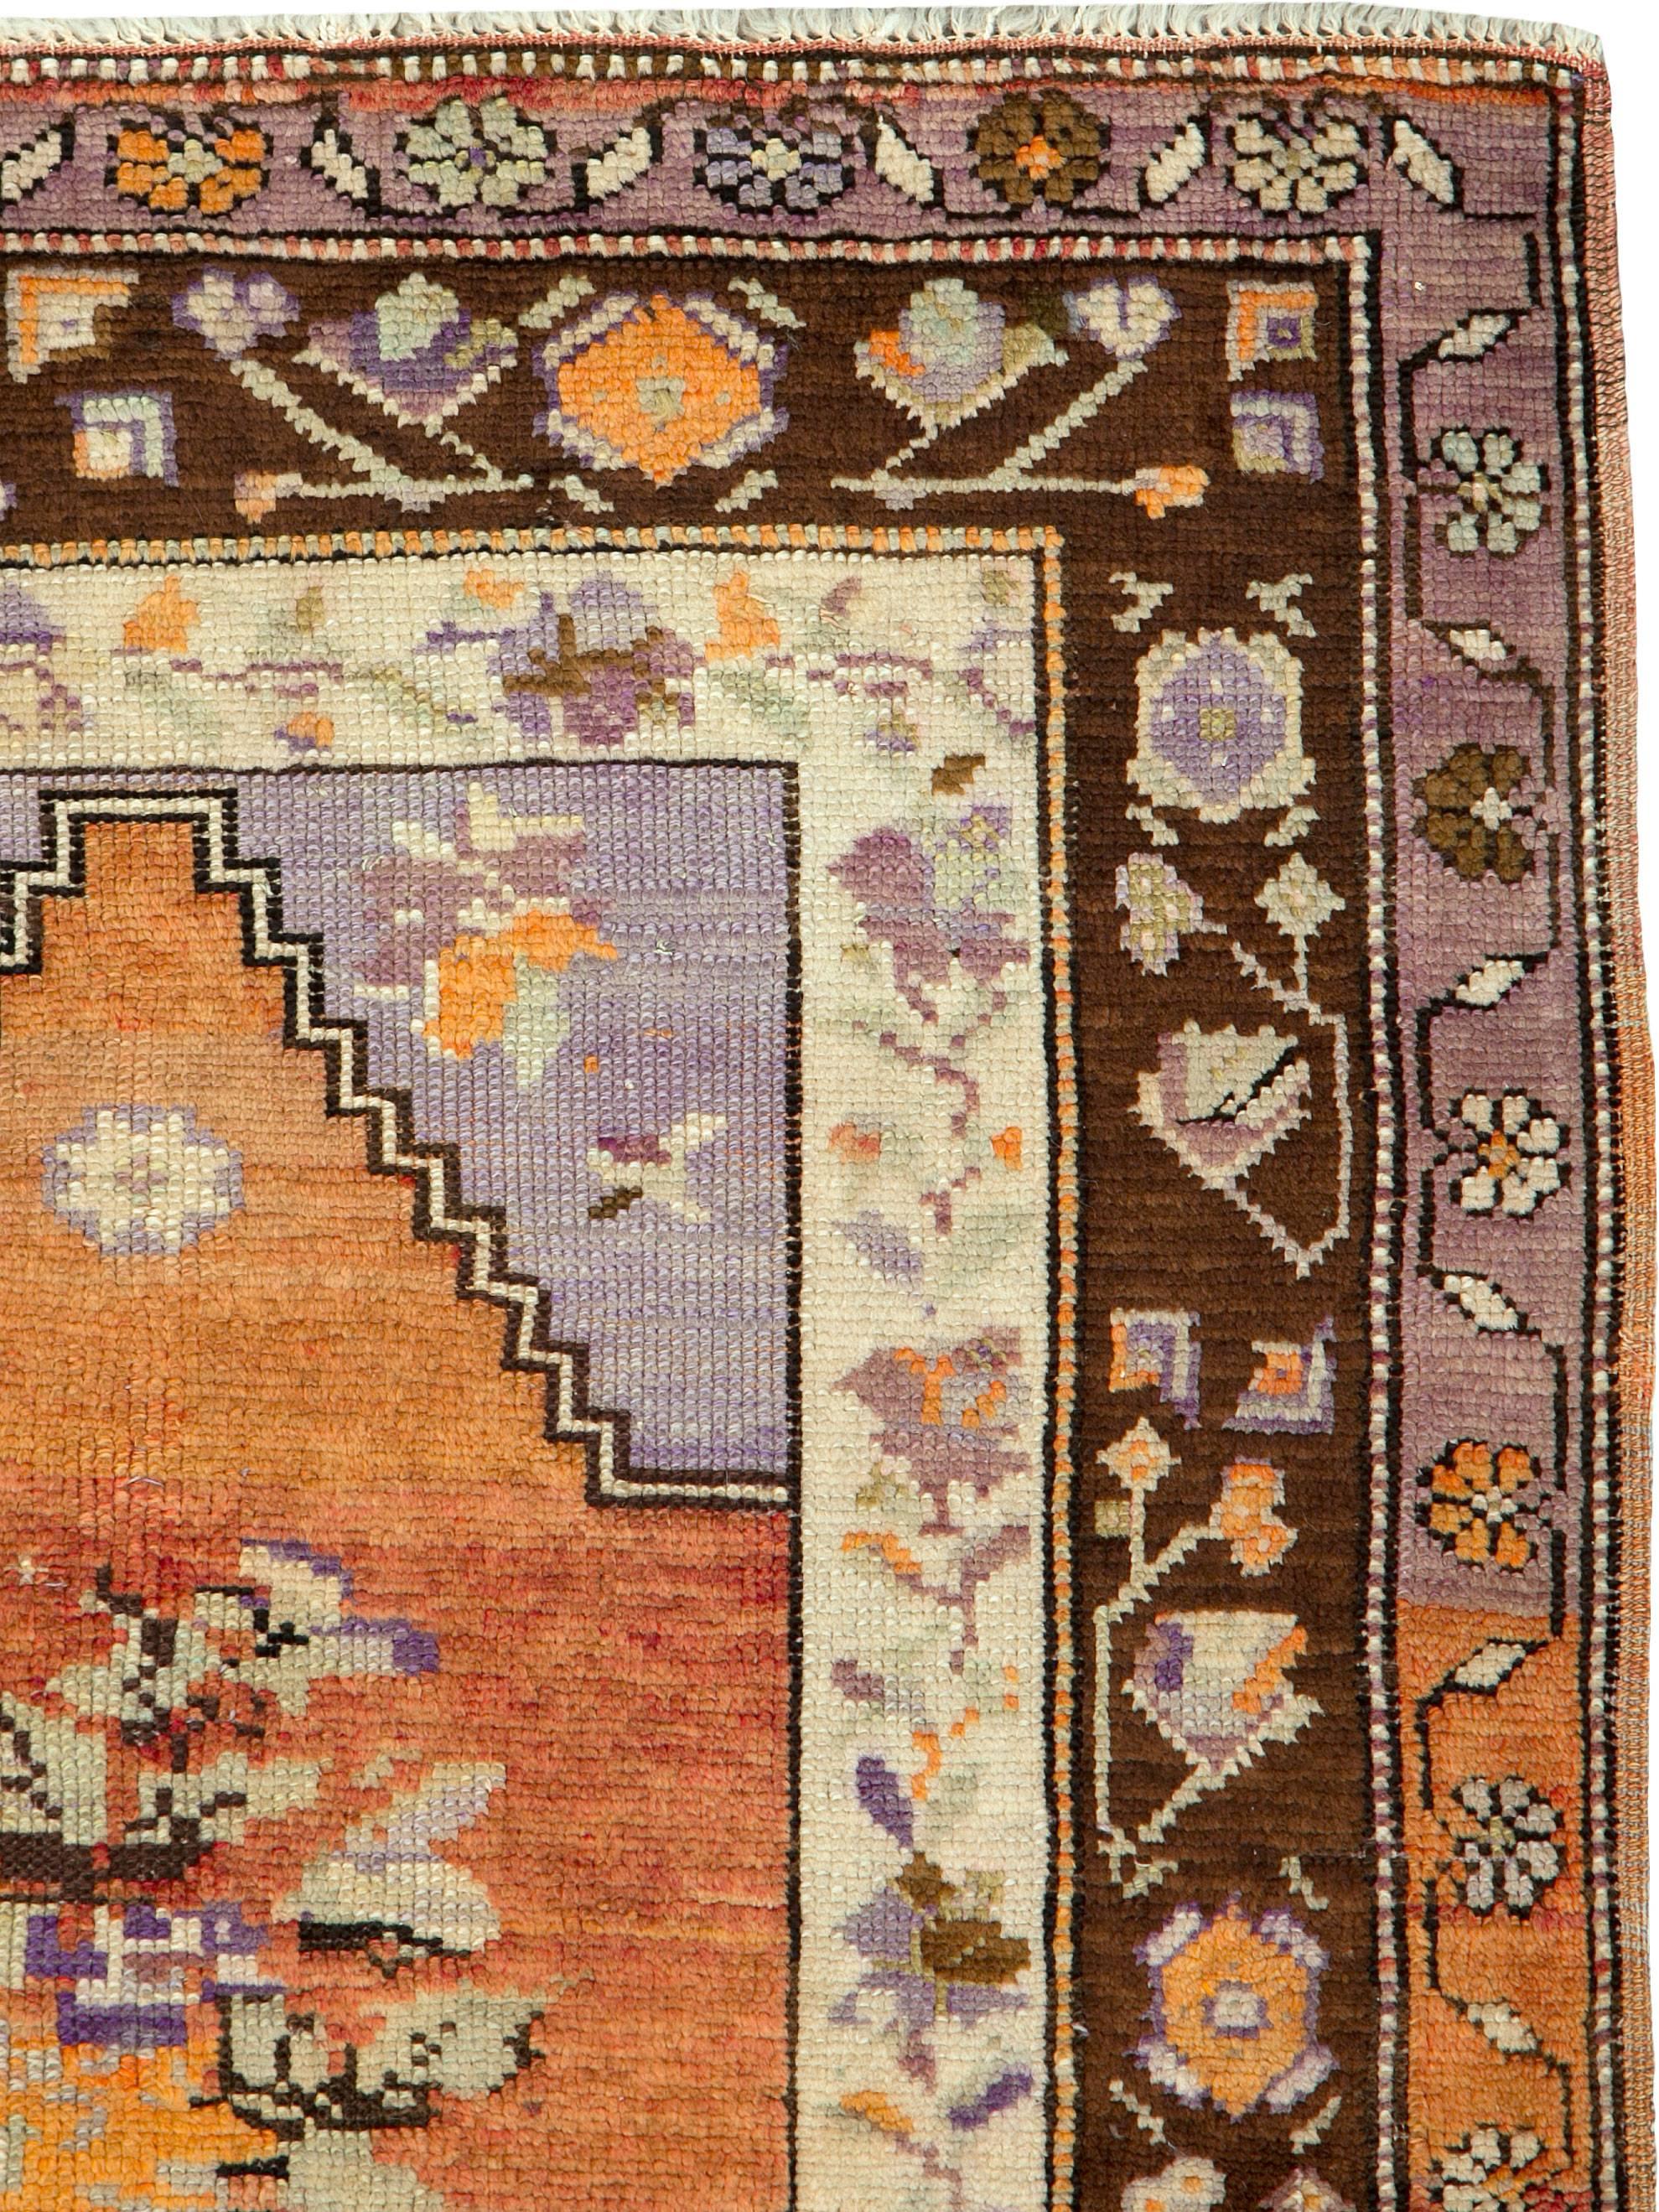 A vintage Turkish Anatolian carpet from the second quarter of the 20th century.